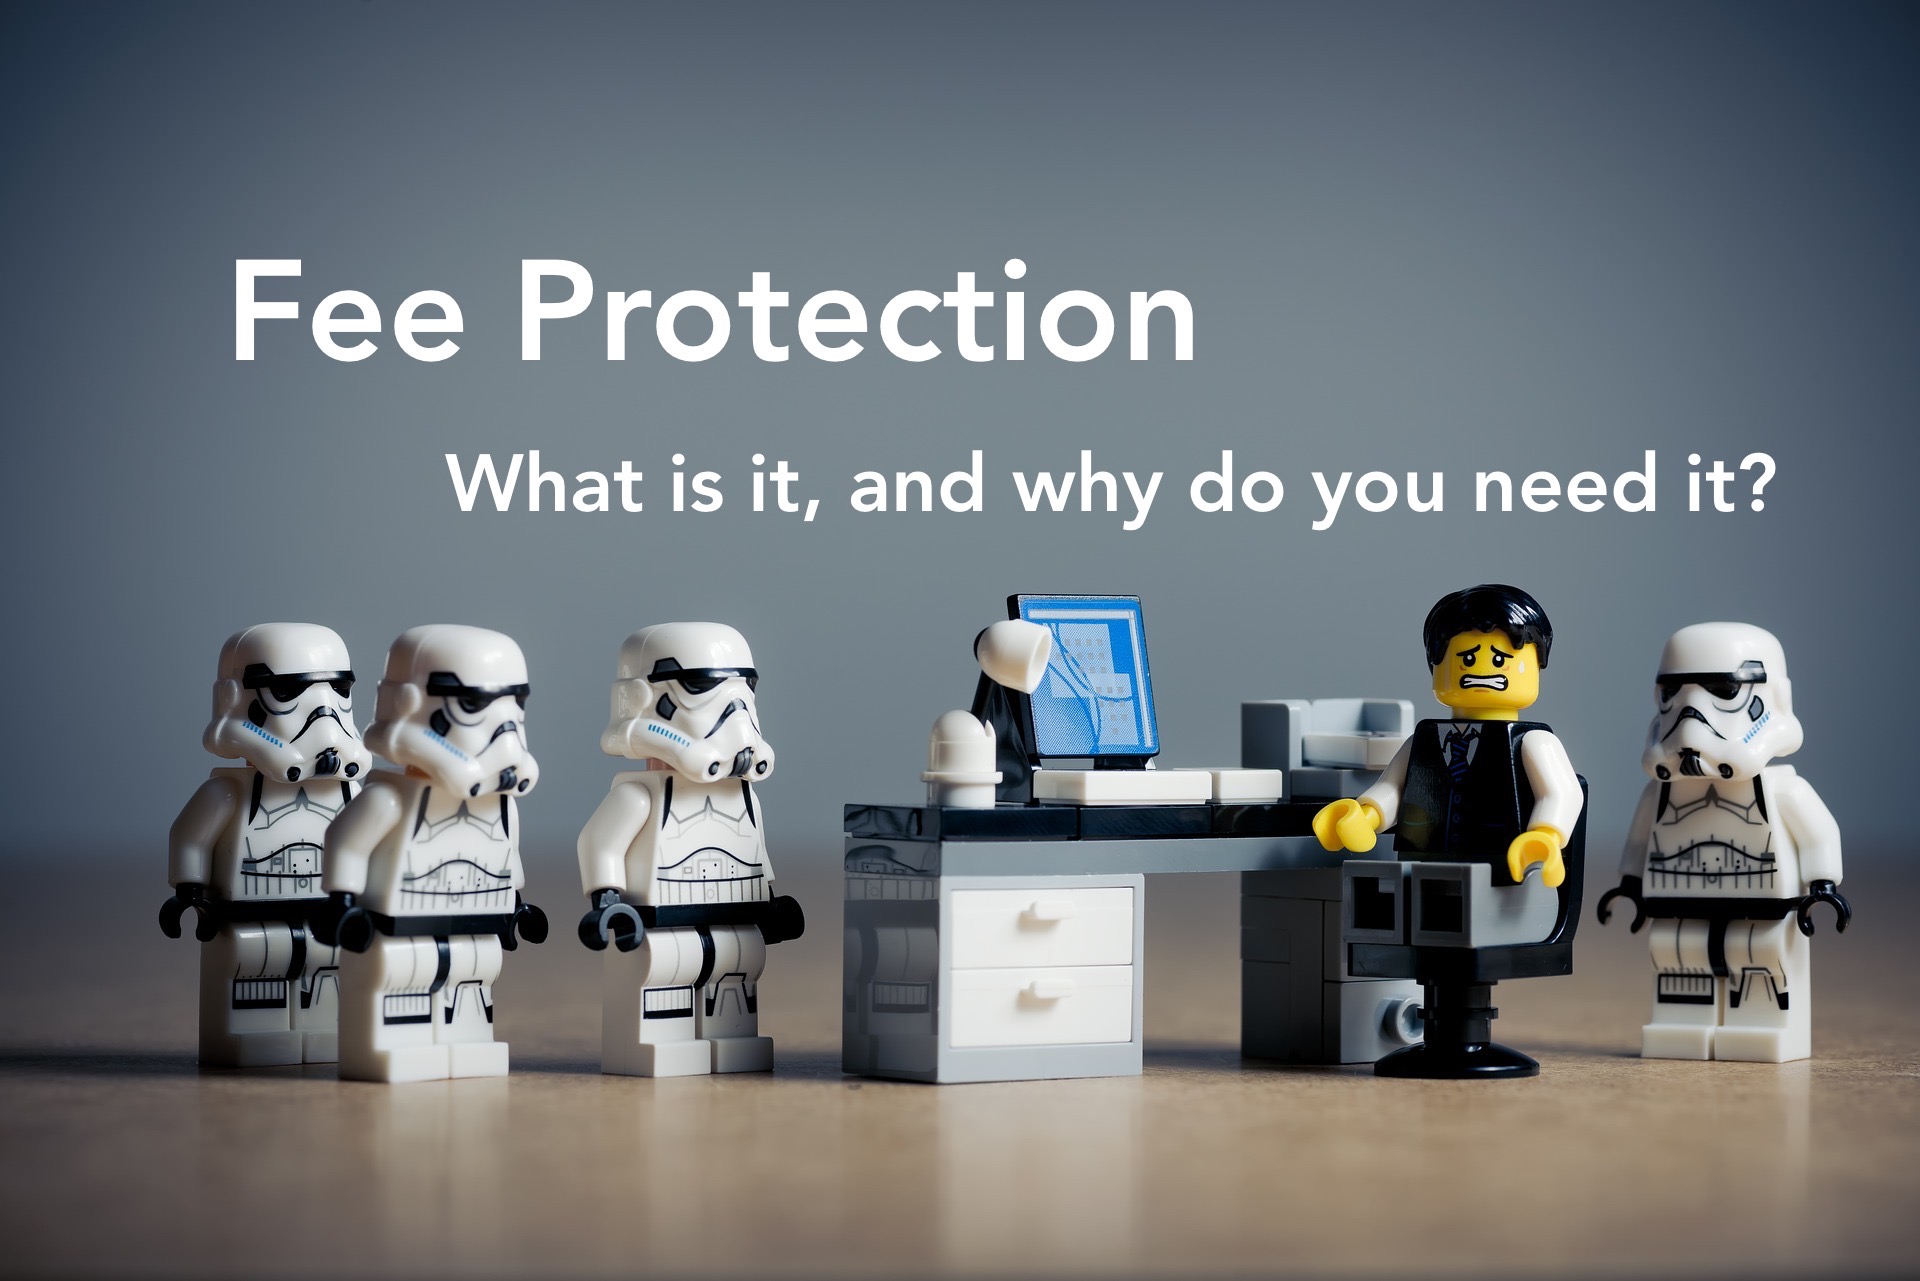 Fee Protection